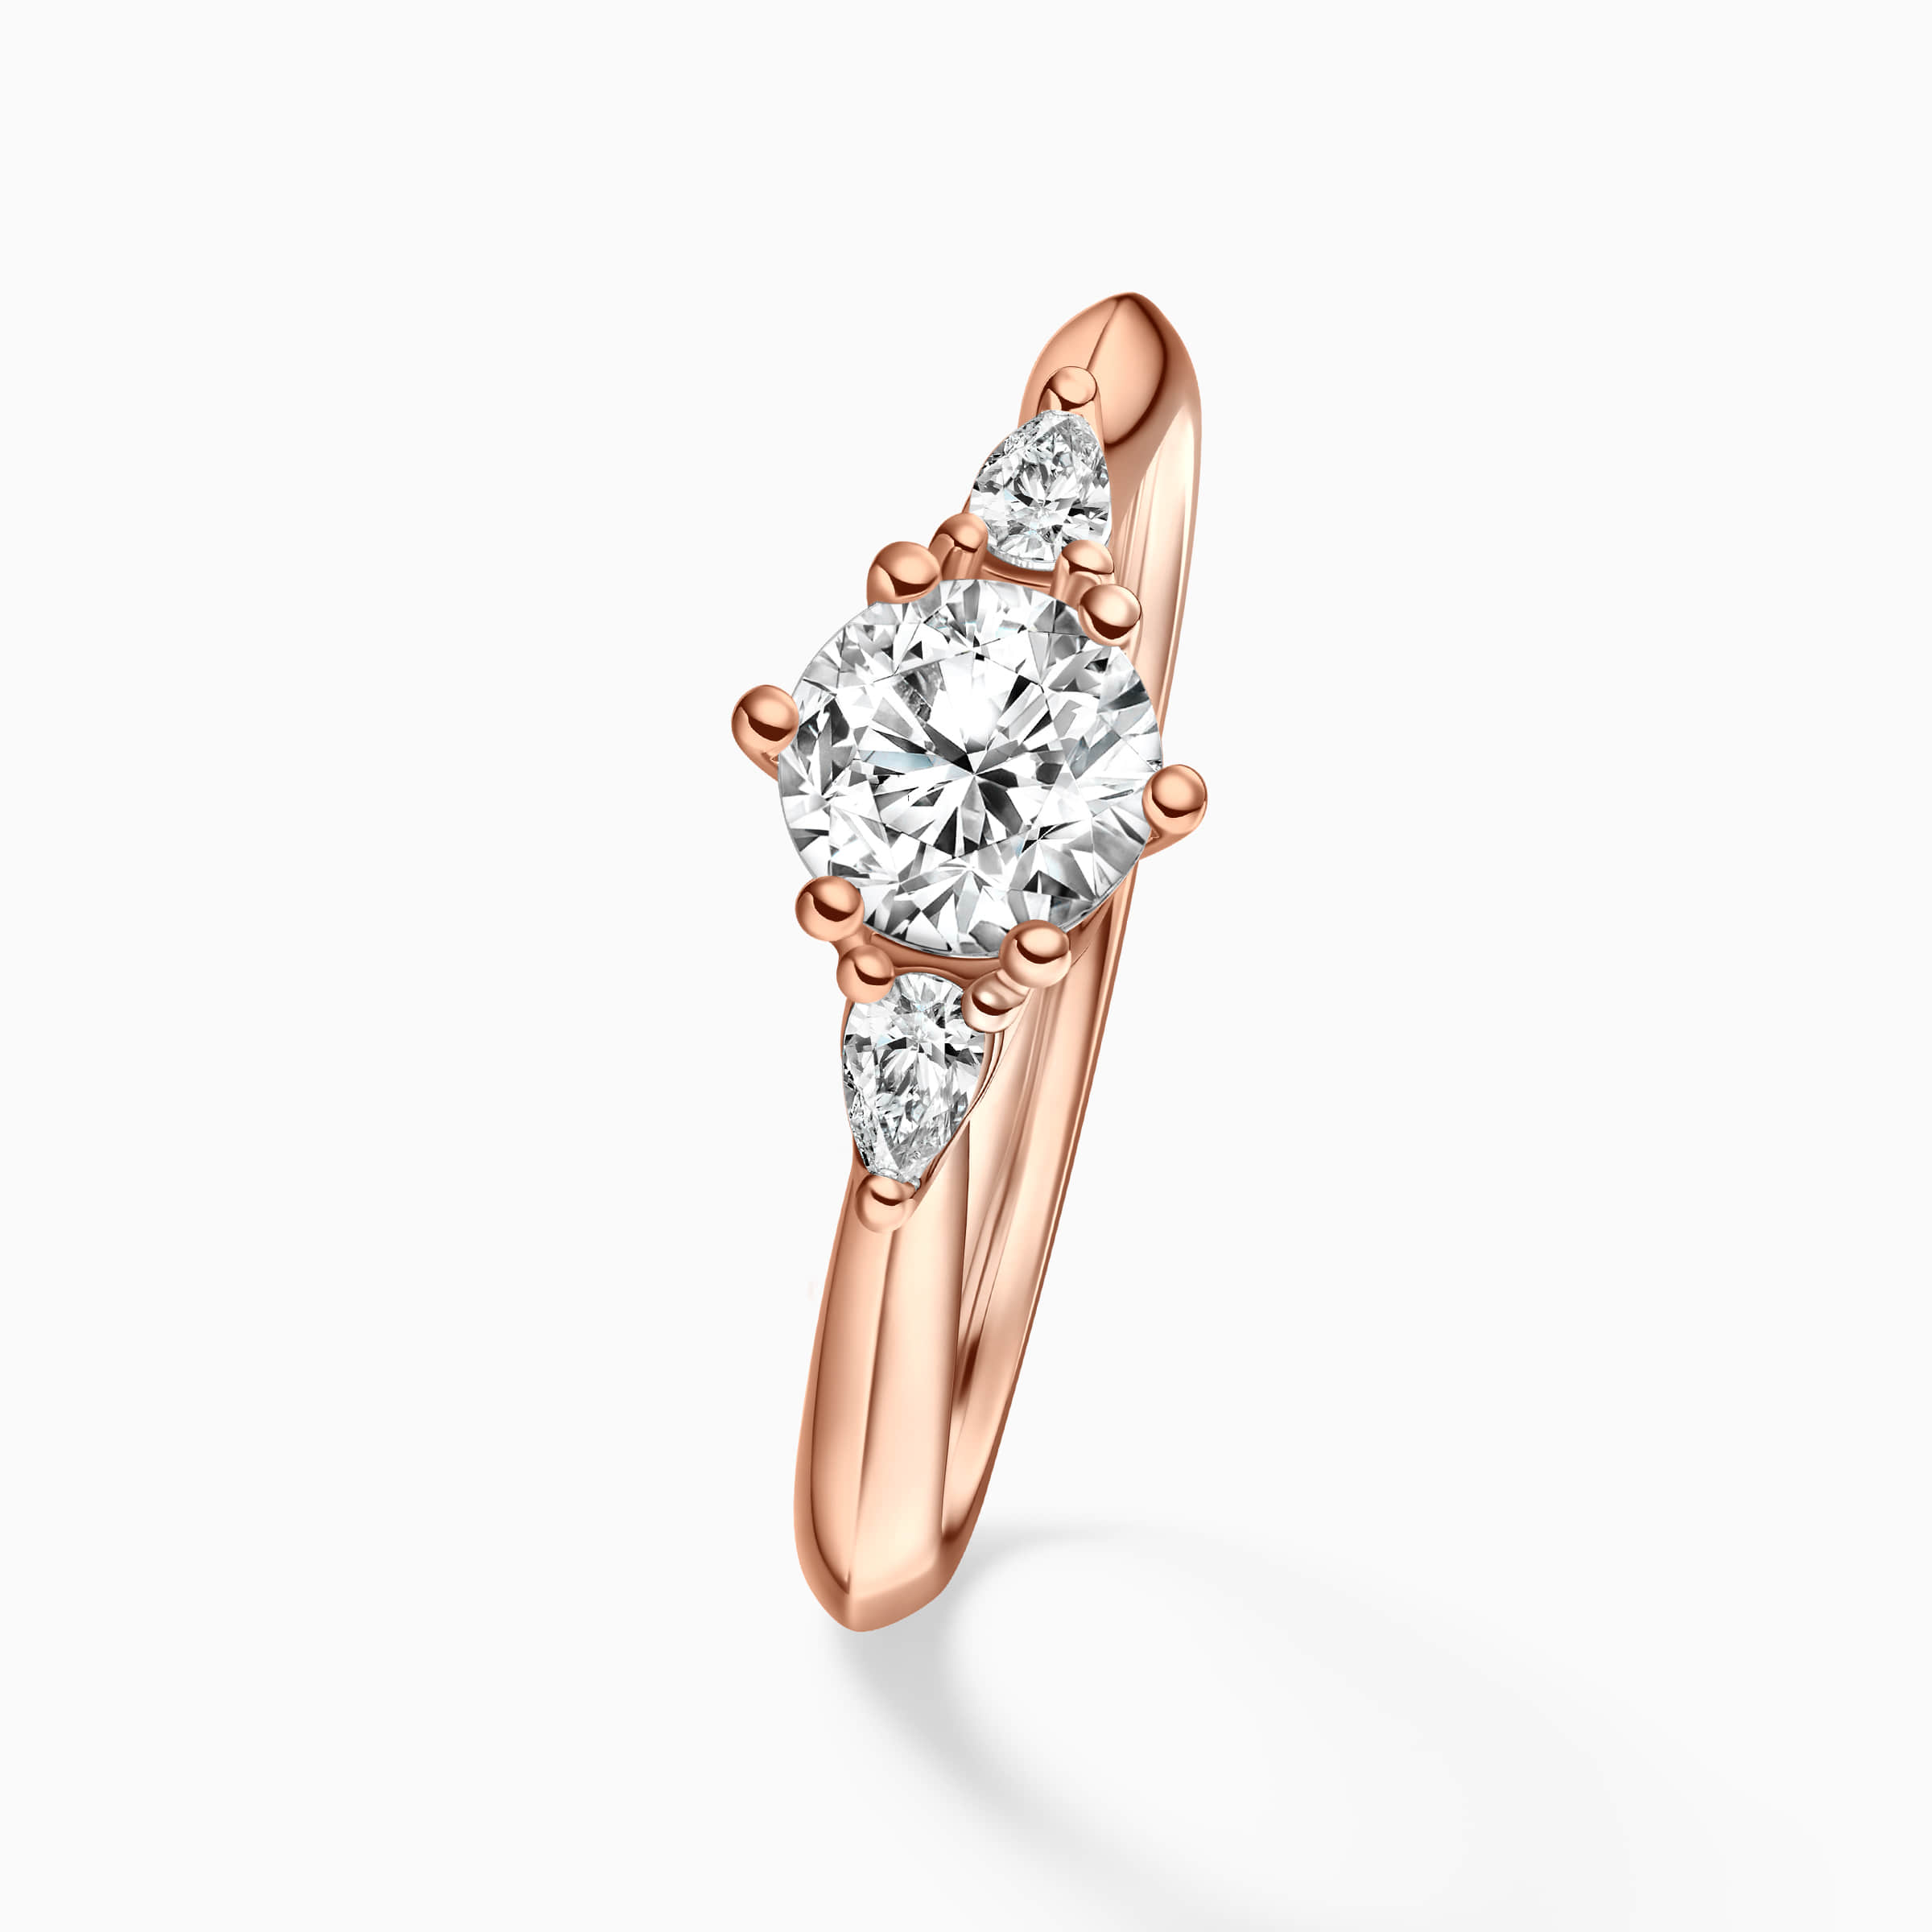 Darry Ring 3 stone engagement ring rose gold